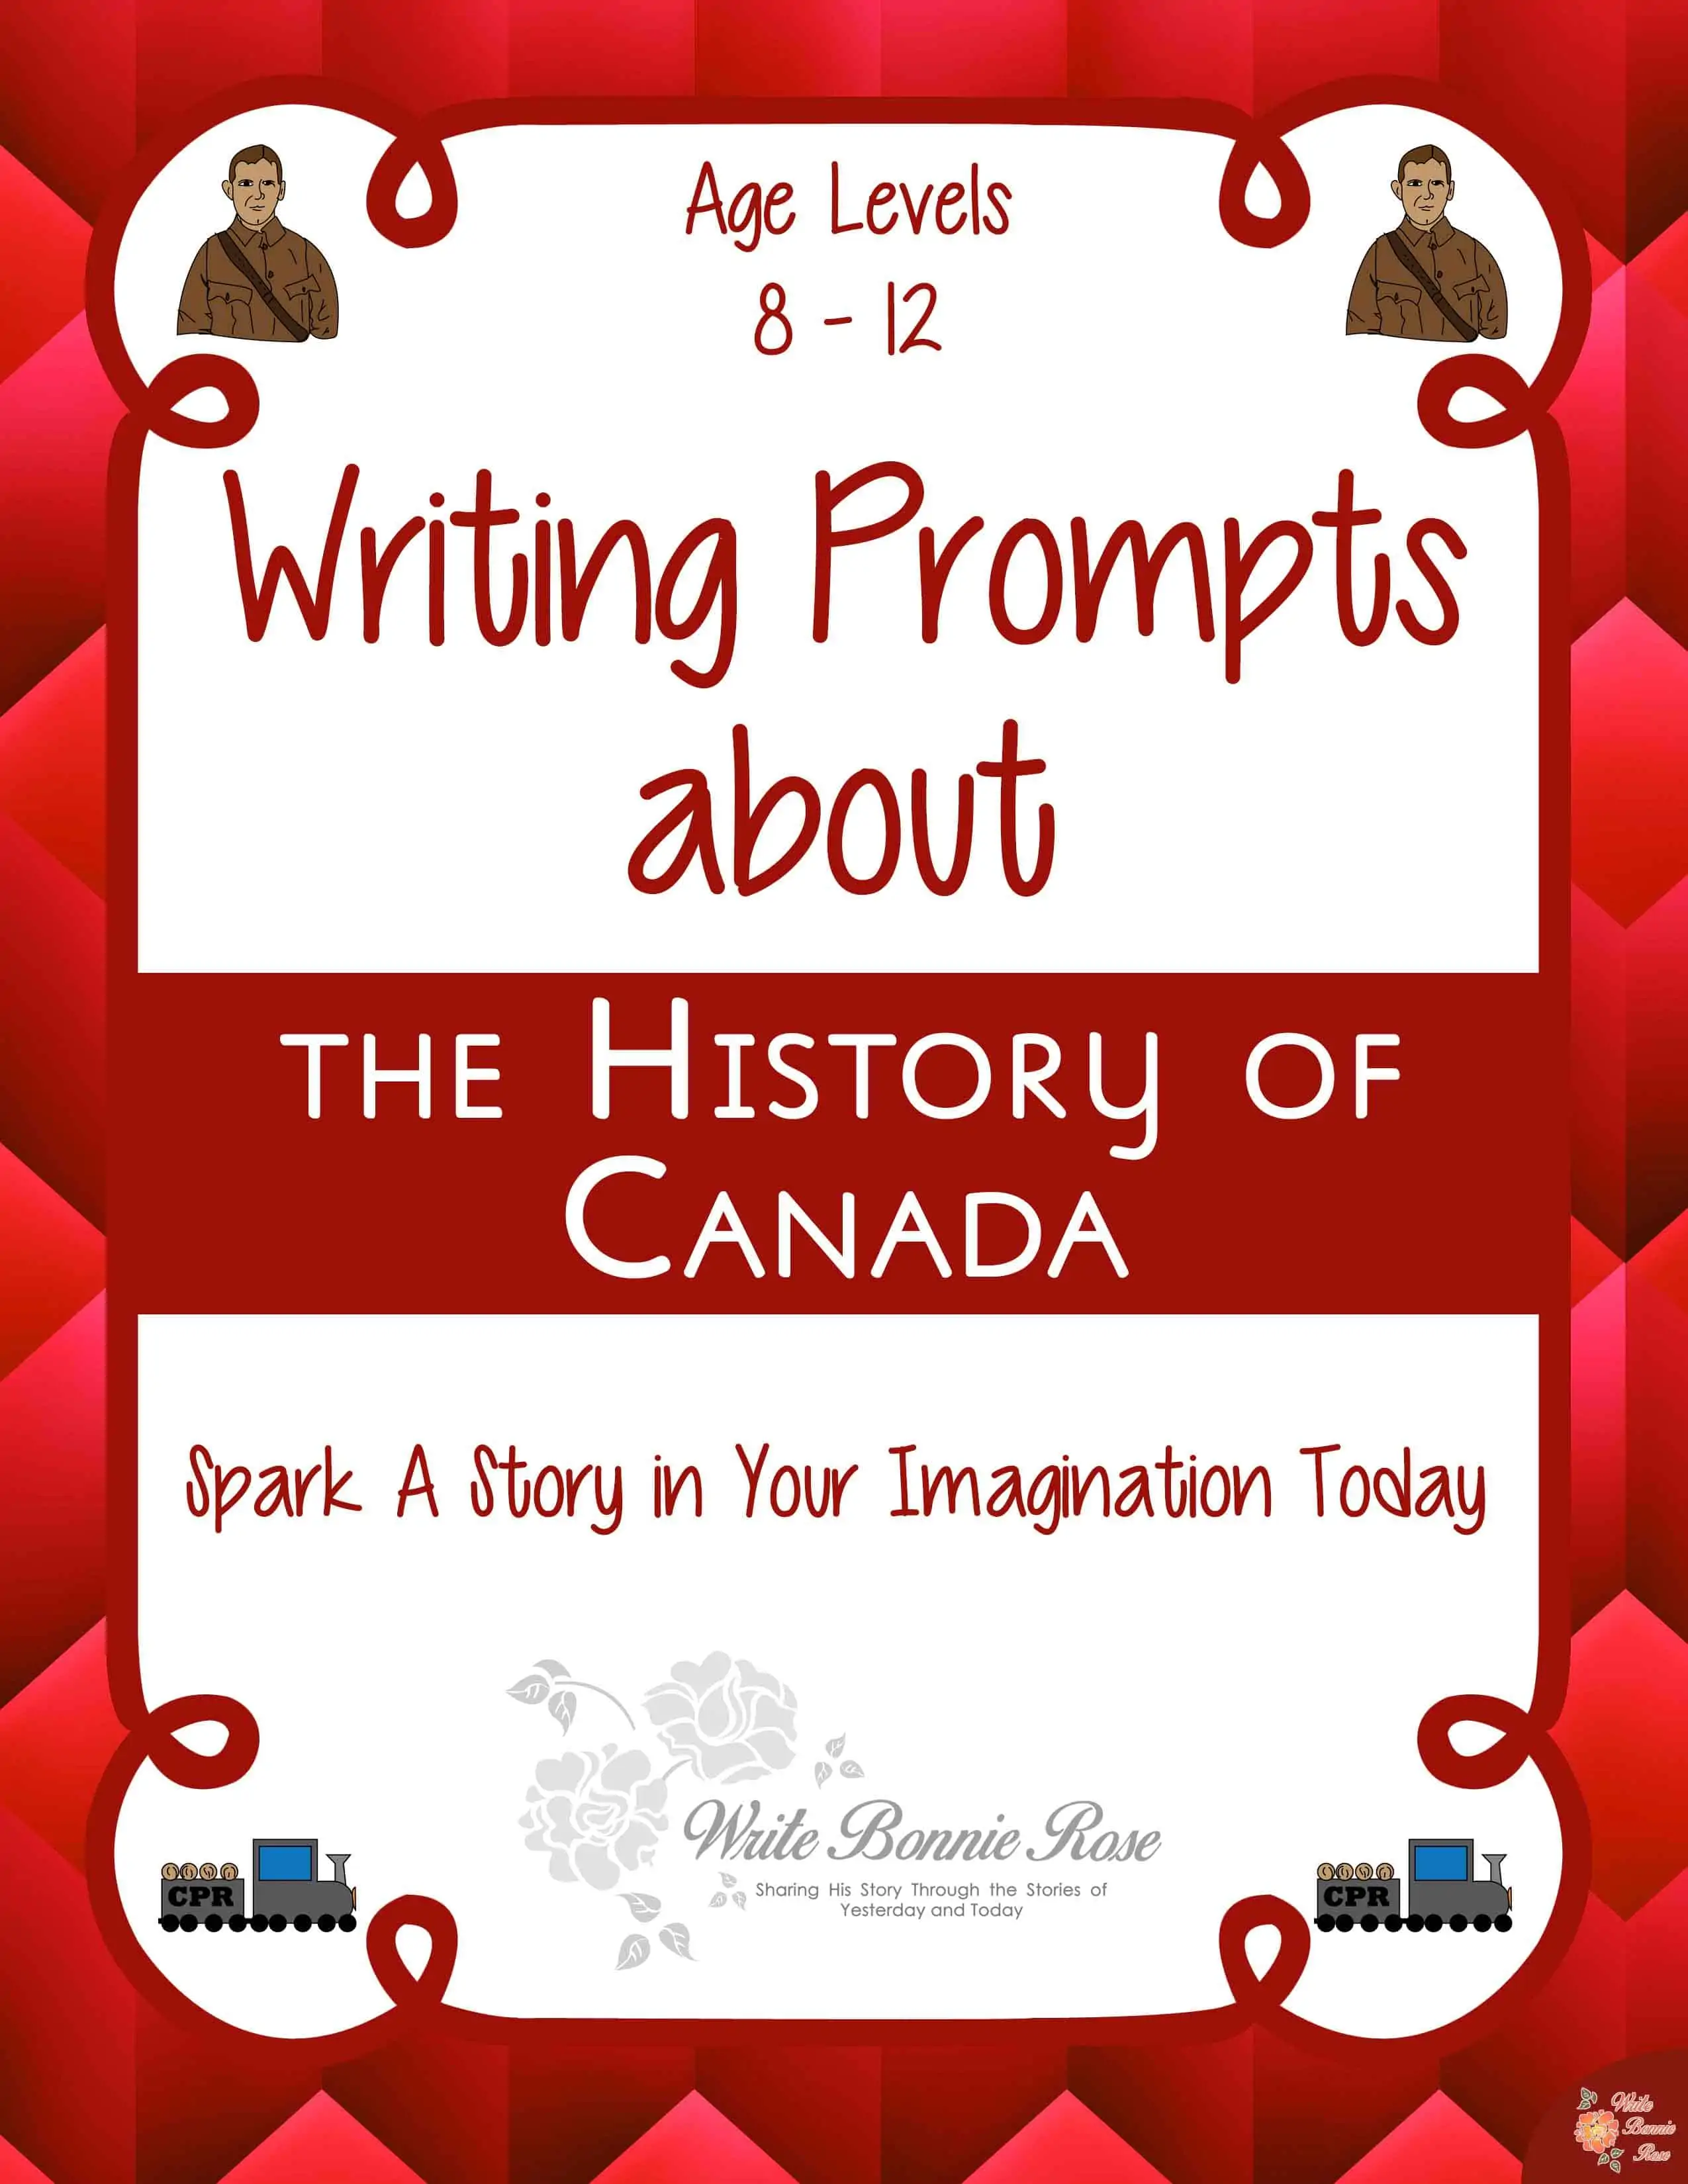 Writing Prompts About the History of Canada